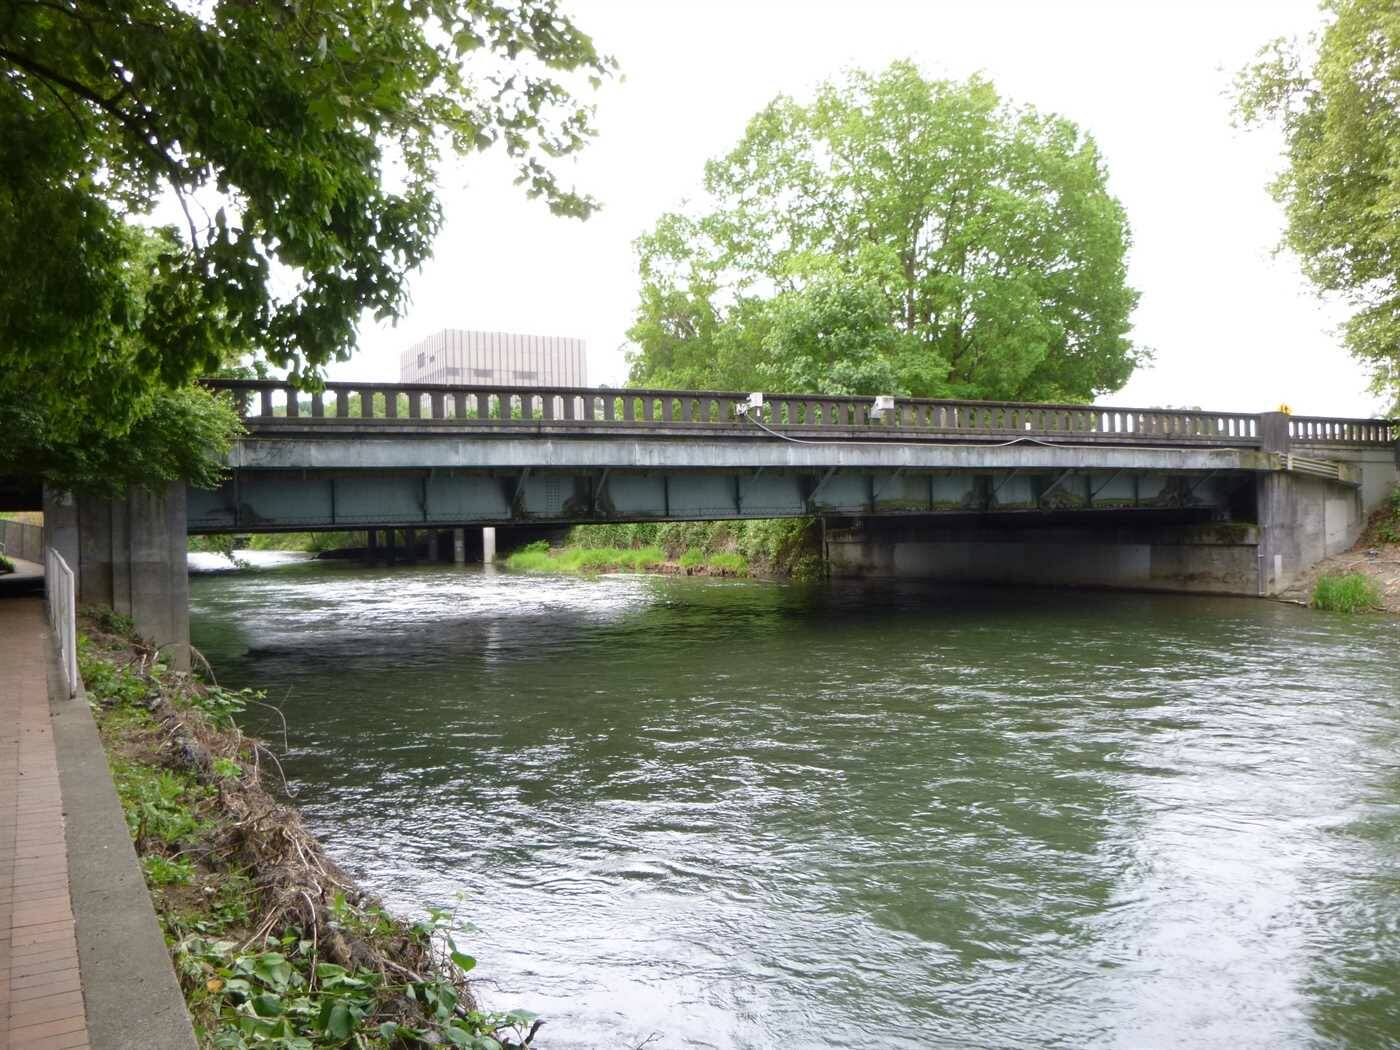 Construction costs for the Bronson Way bridge project are estimated at $2.3 million. Photo courtesy of the City of Renton.